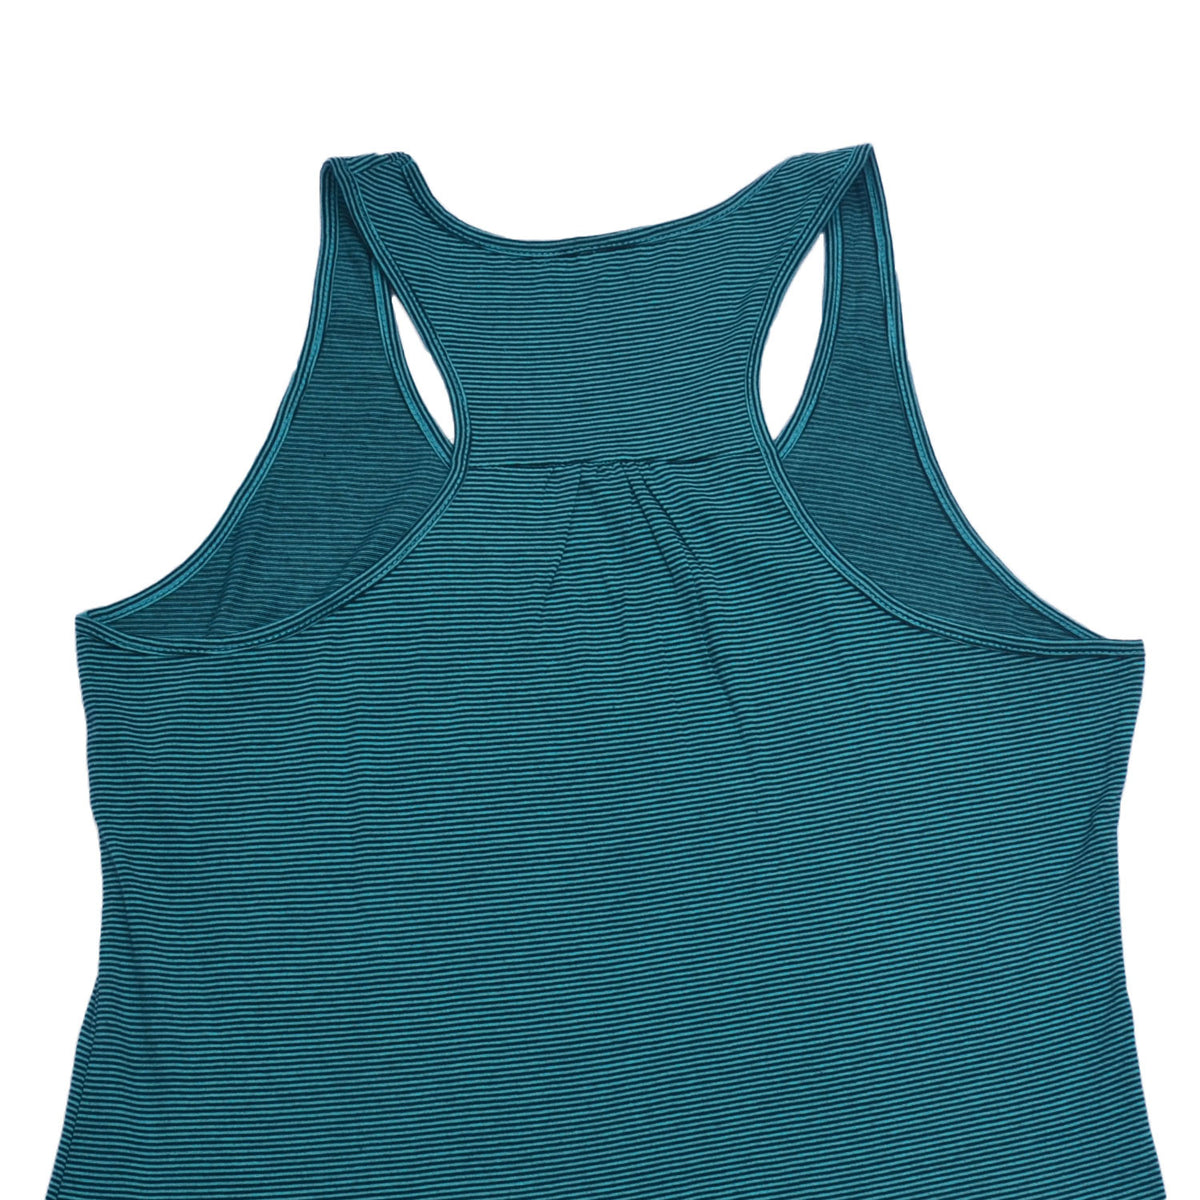 Racer back with ruffles tank top